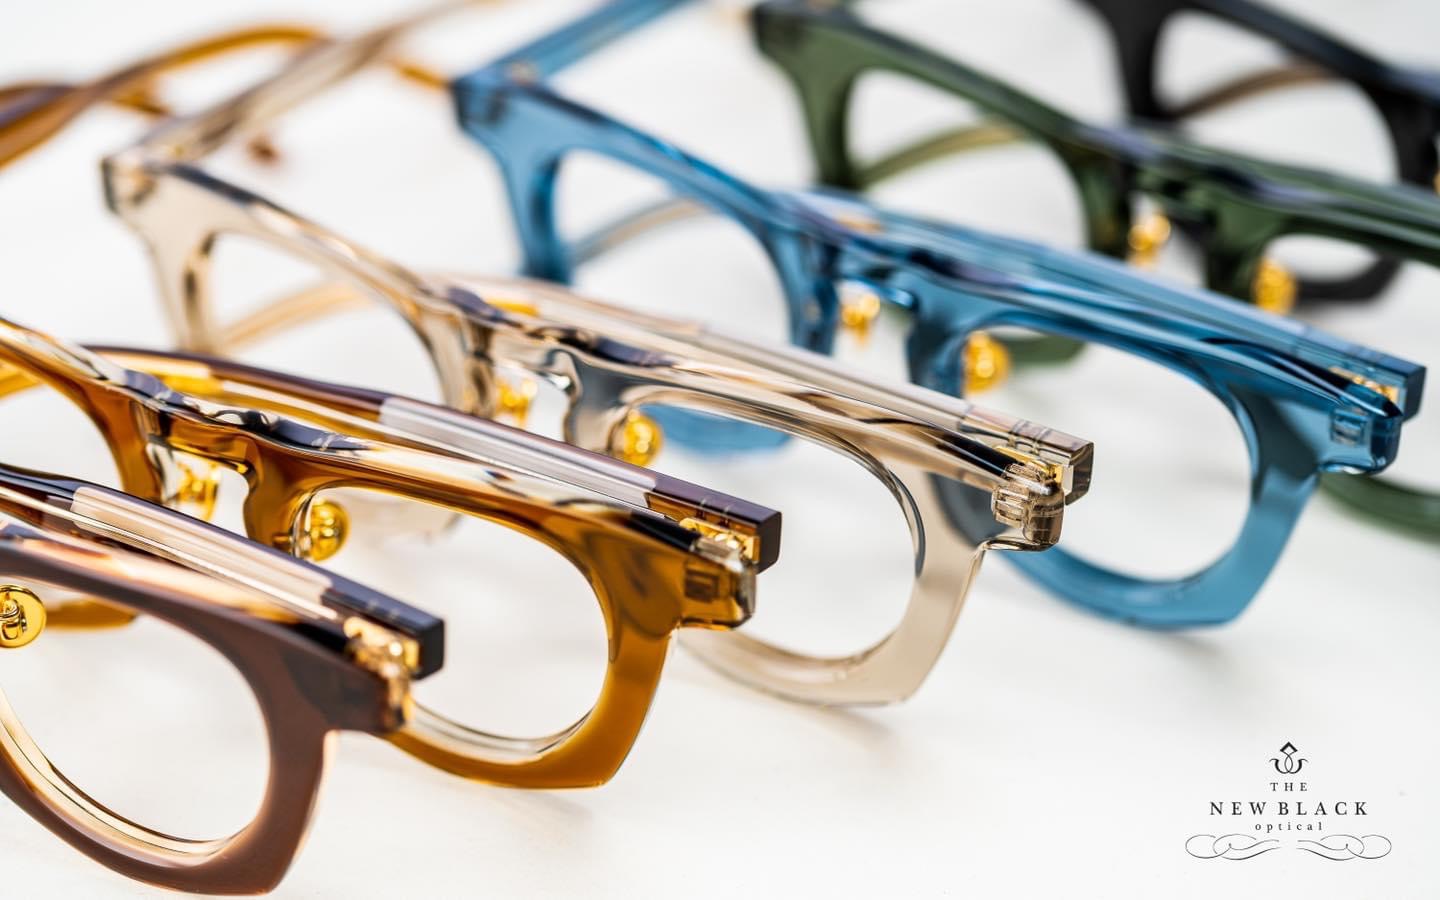 The New Black Optical -Eyevan7285 Taylor with respect| Dita| Kame mannen| Mr Leight